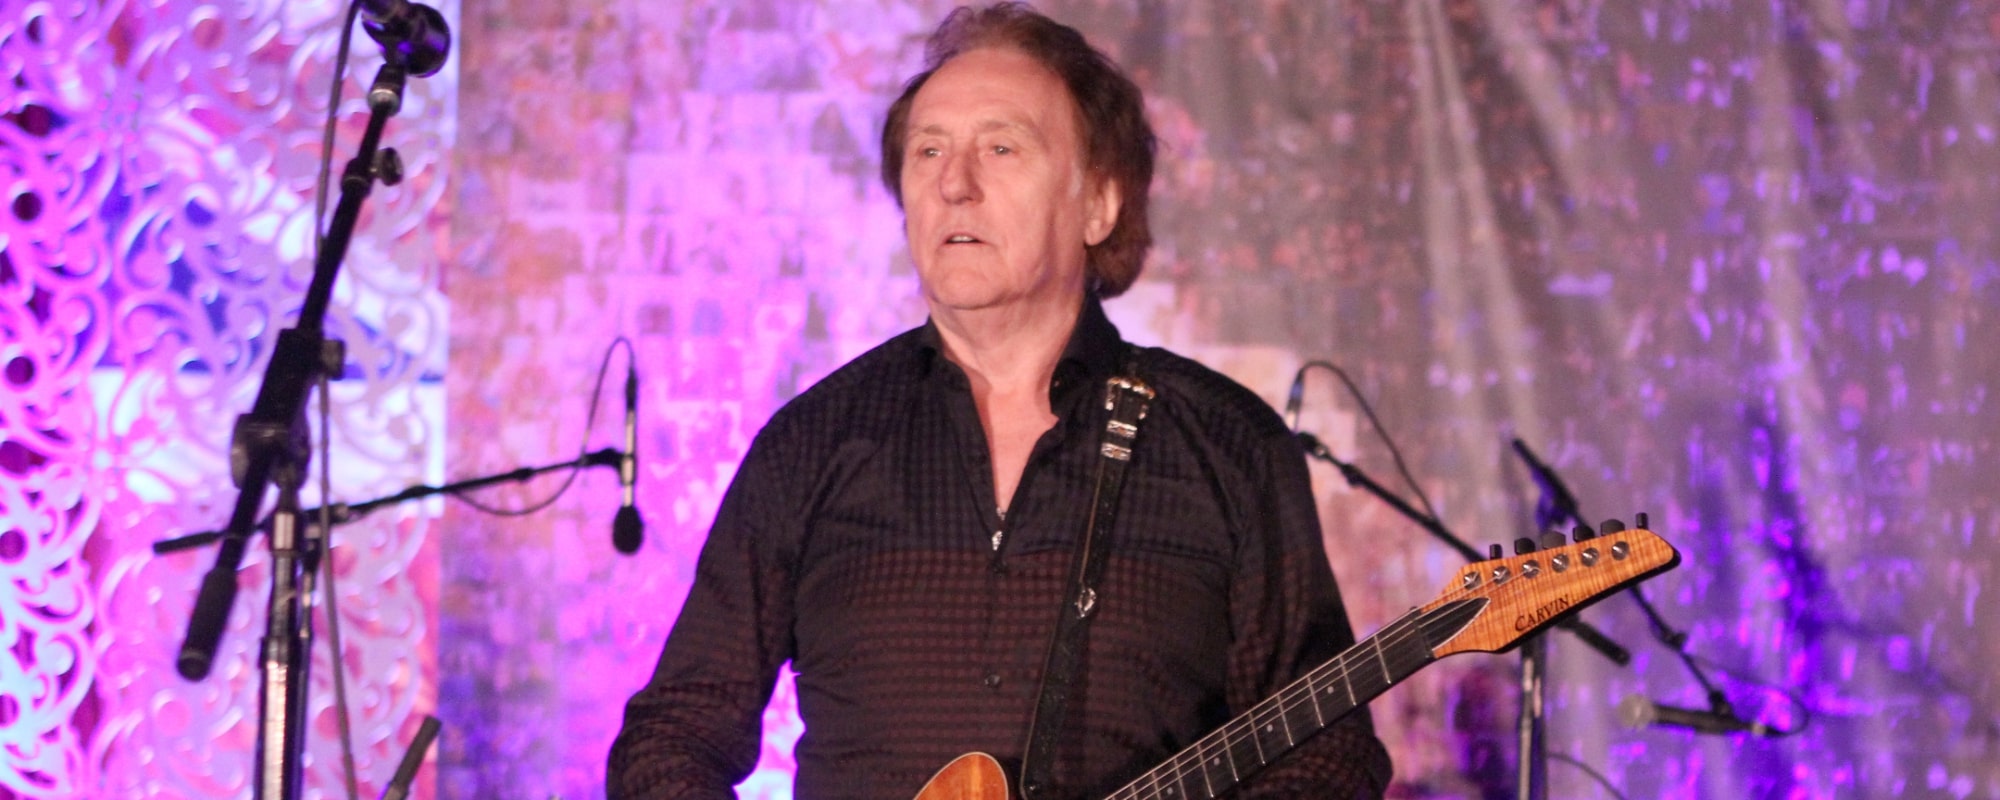 Denny Laine, Founding Member of Wings and The Moody Blues Dies at 79; Wife Shares Loving Tribute